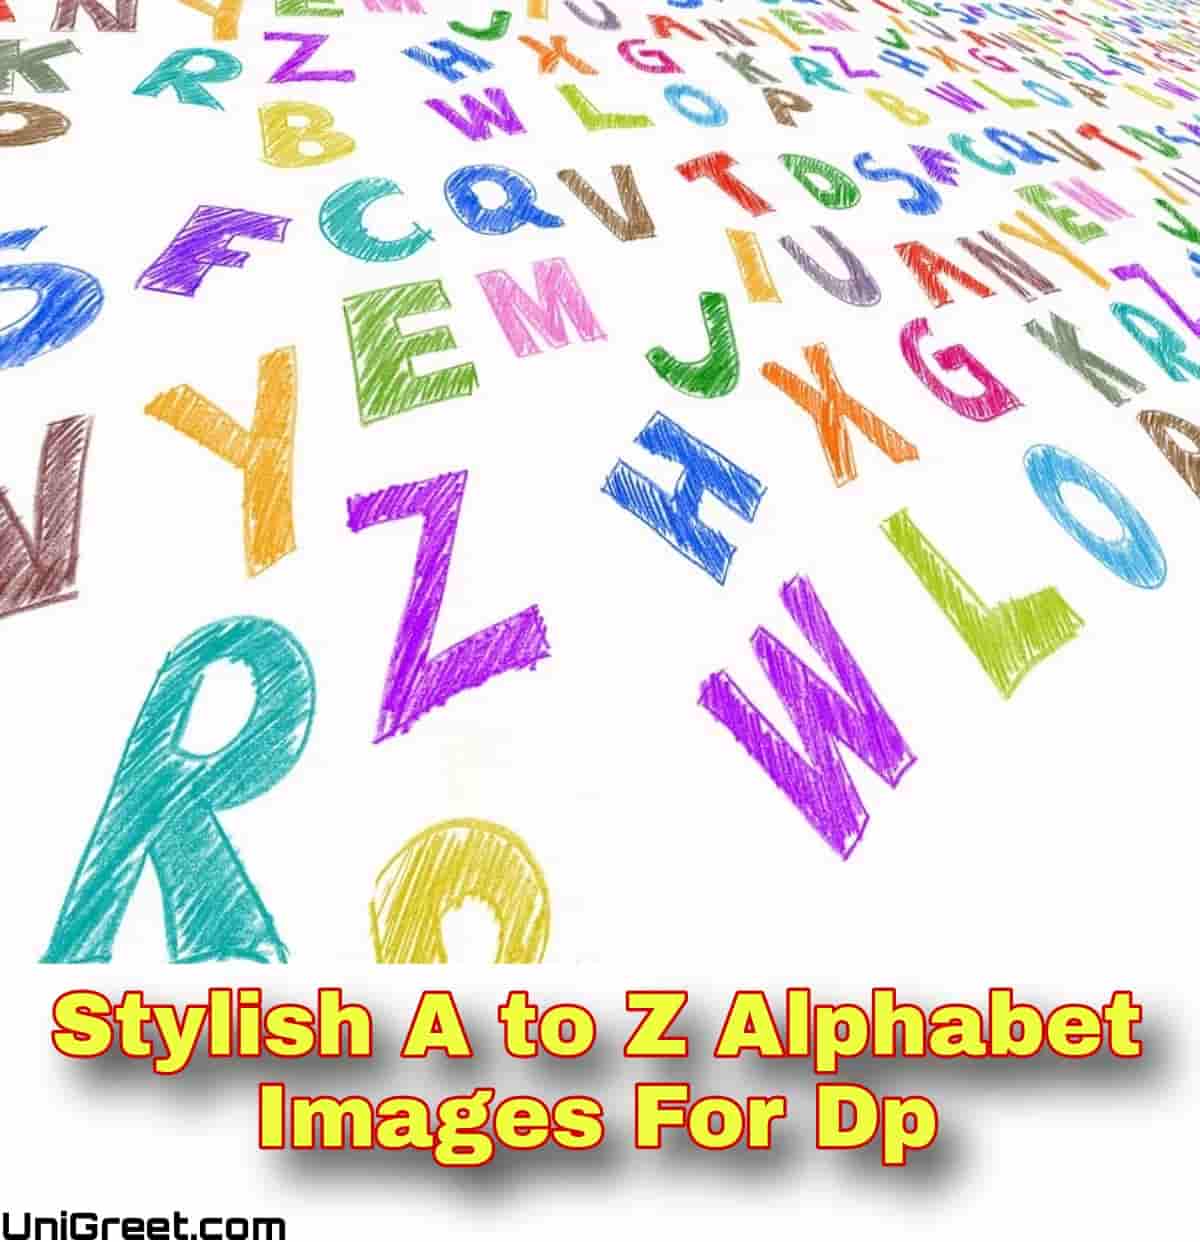 Stylish A to Z Alphabet Images For Dp